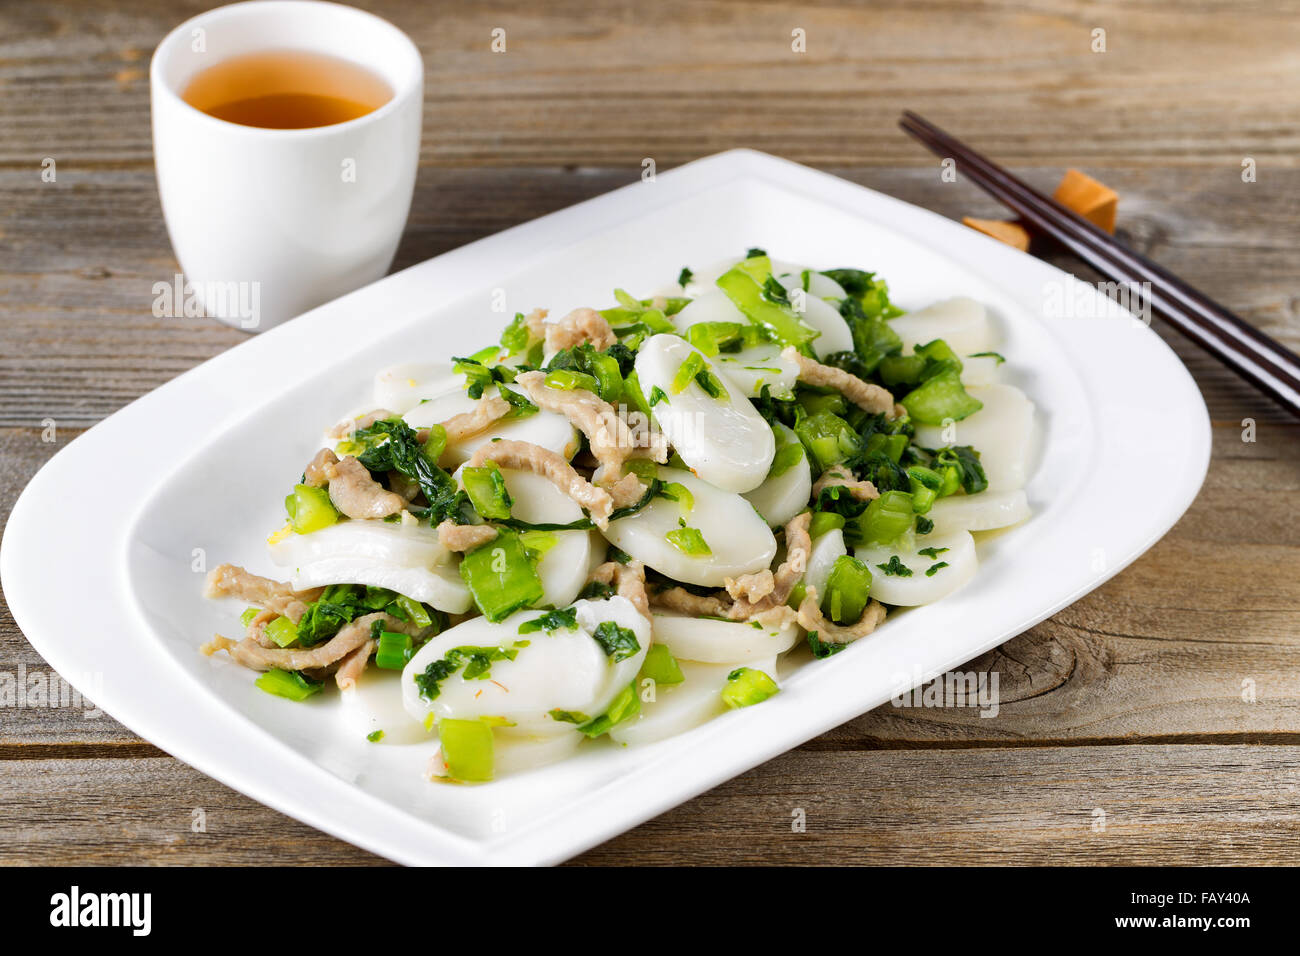 Close up front view of stir fry consisting of sliced sticky rice cakes, onion, and chicken. Chopsticks and tea in background on Stock Photo